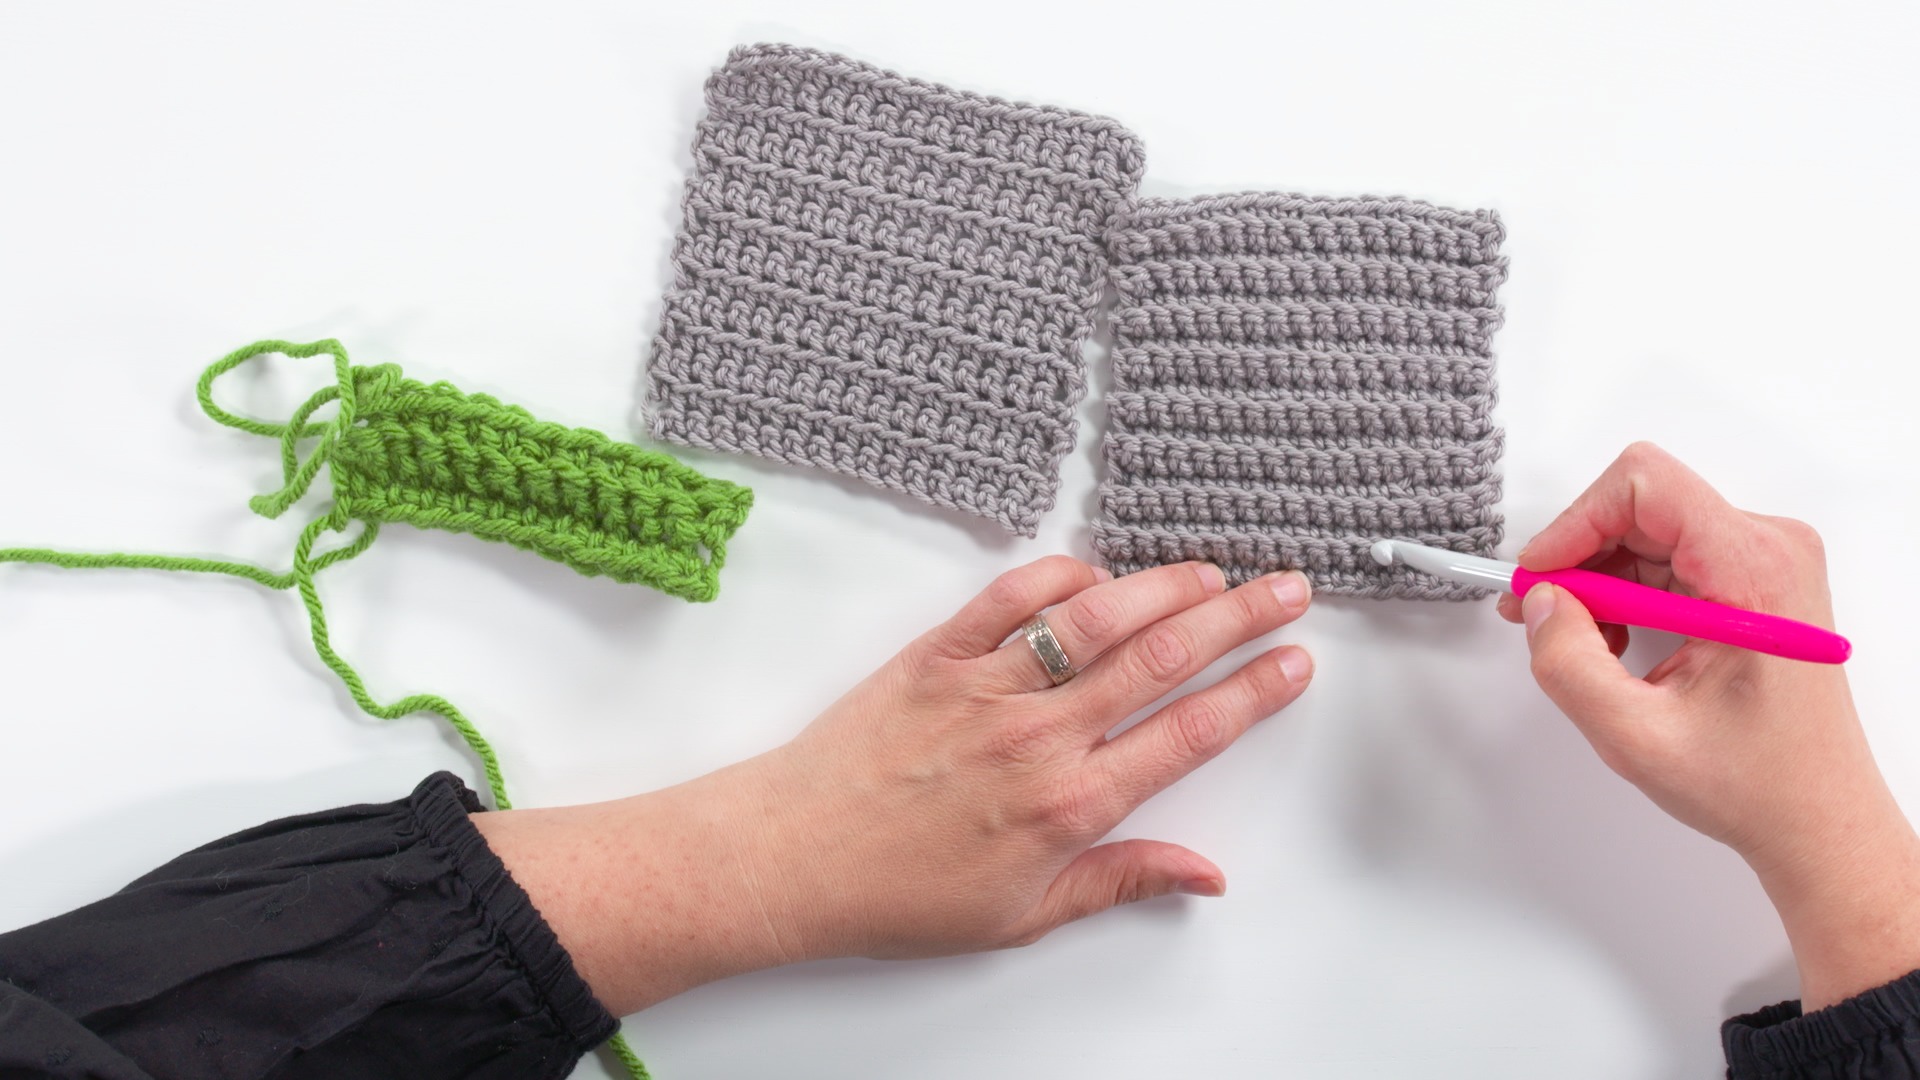 14-Day Learn to Crochet Series: Day 13